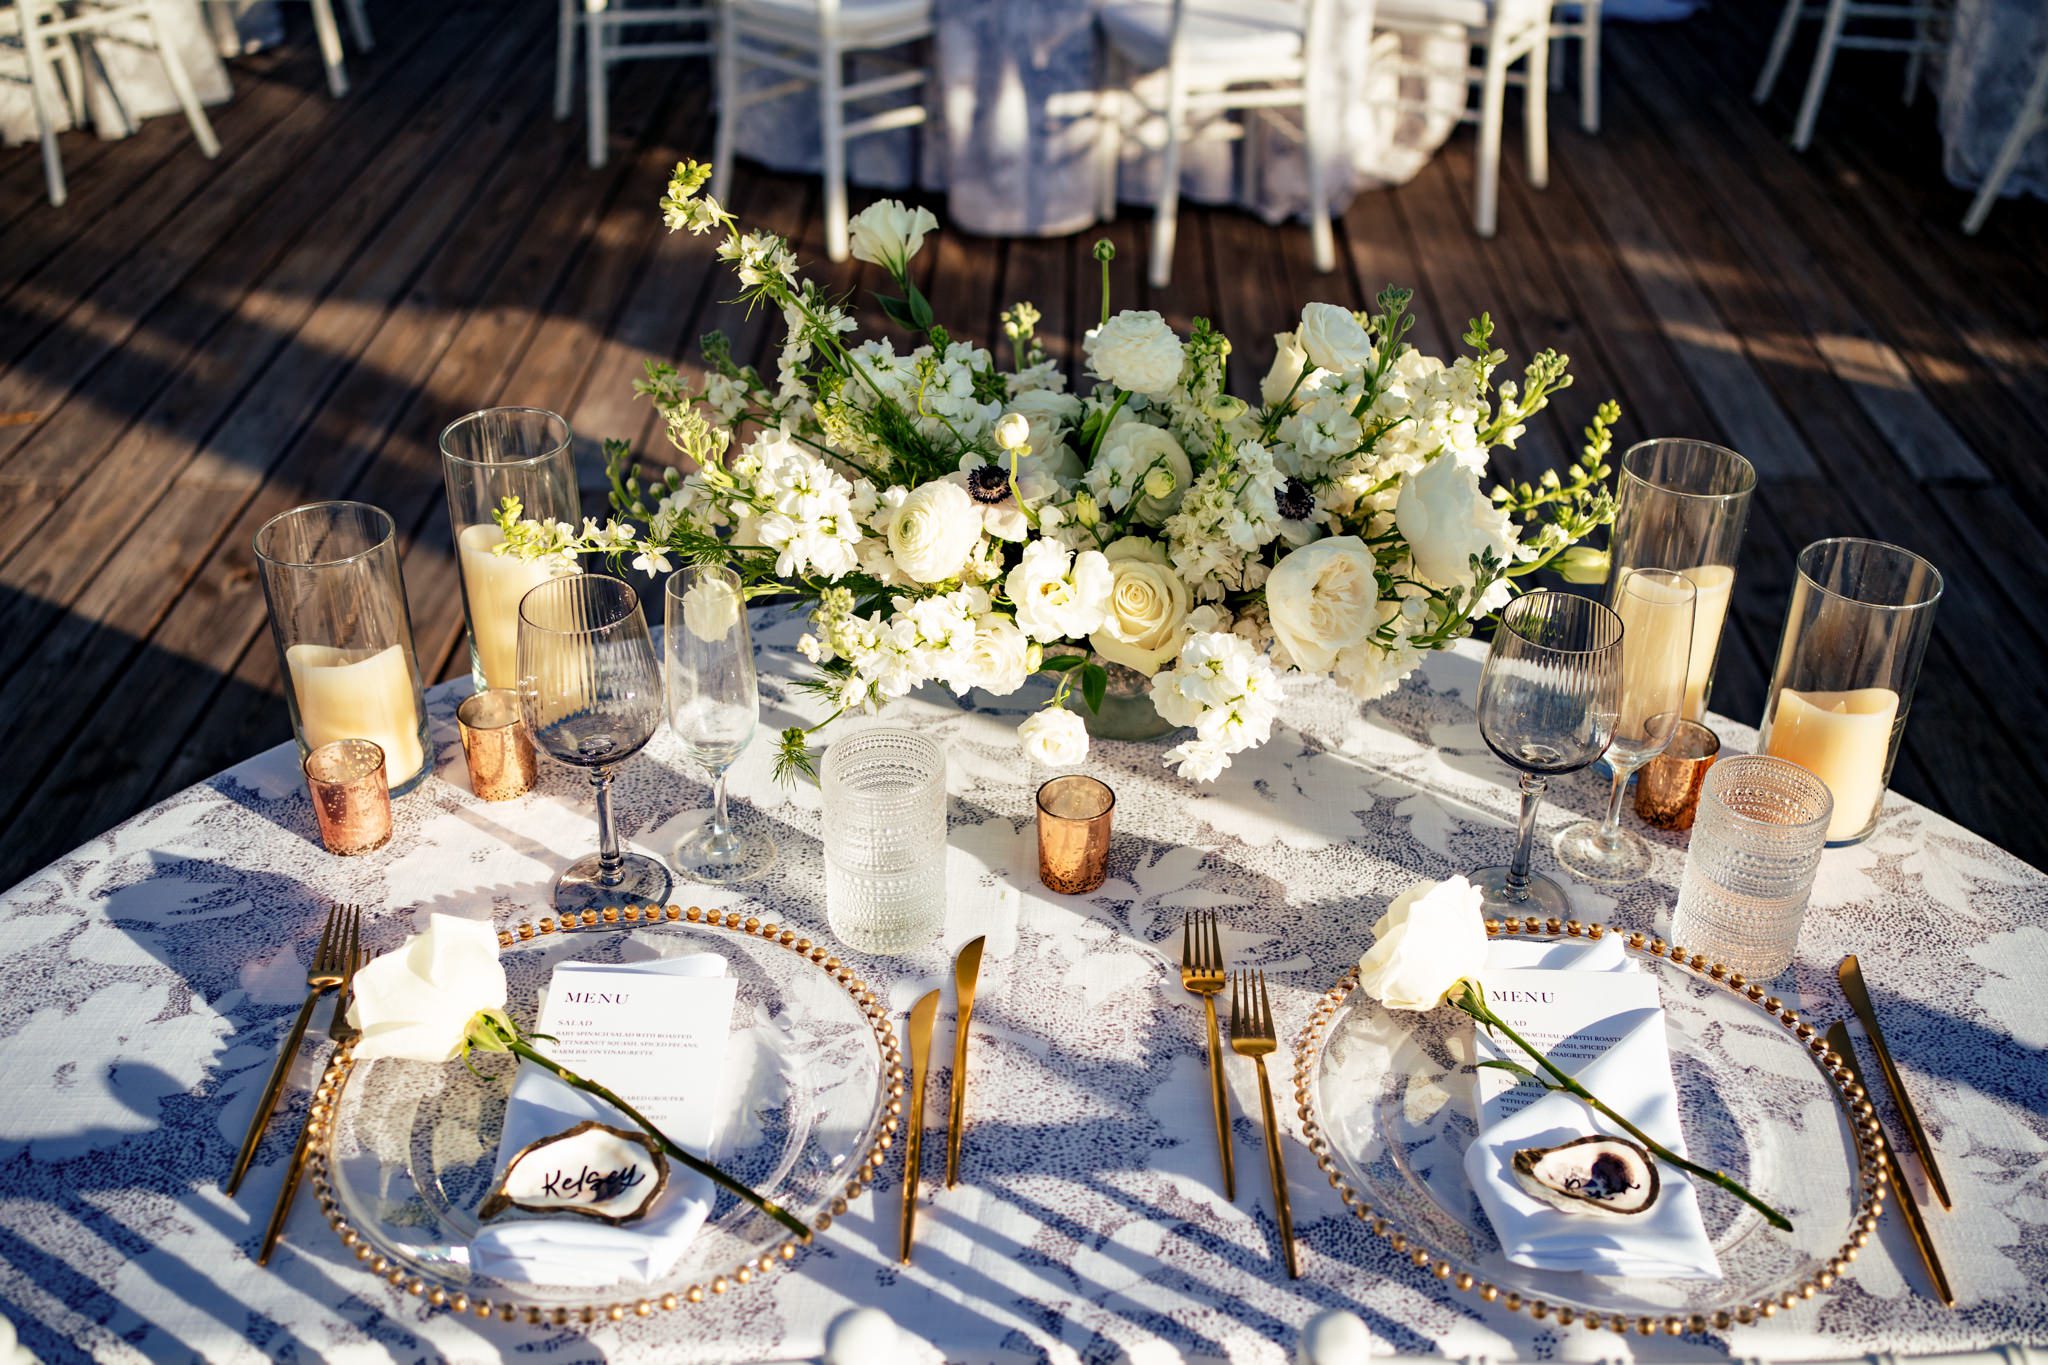 florals provided by duarte floral design. rentals by table 7 key west. signage by blue thistle studio